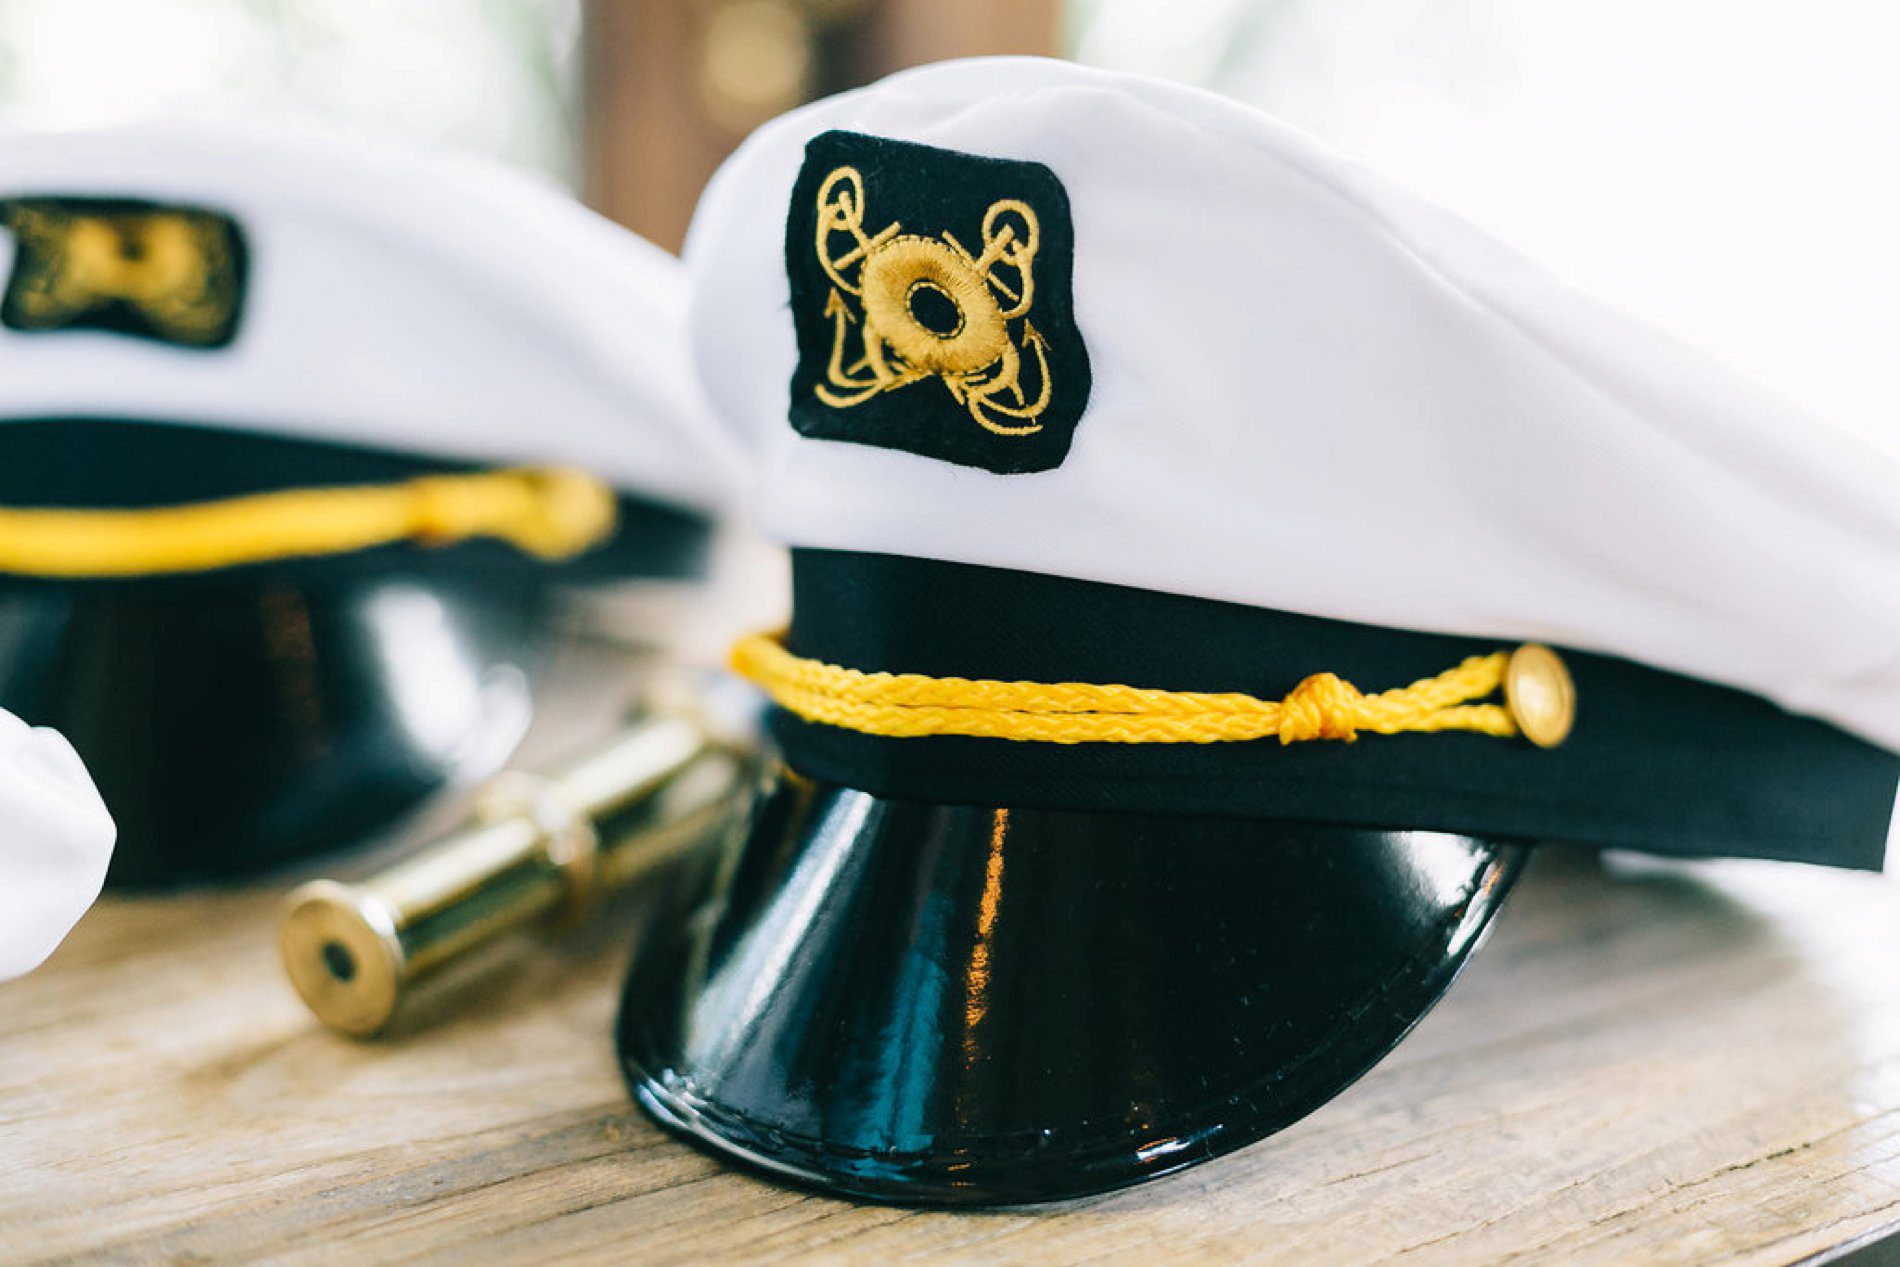 Captains hat at a nautical themed wedding photo booth